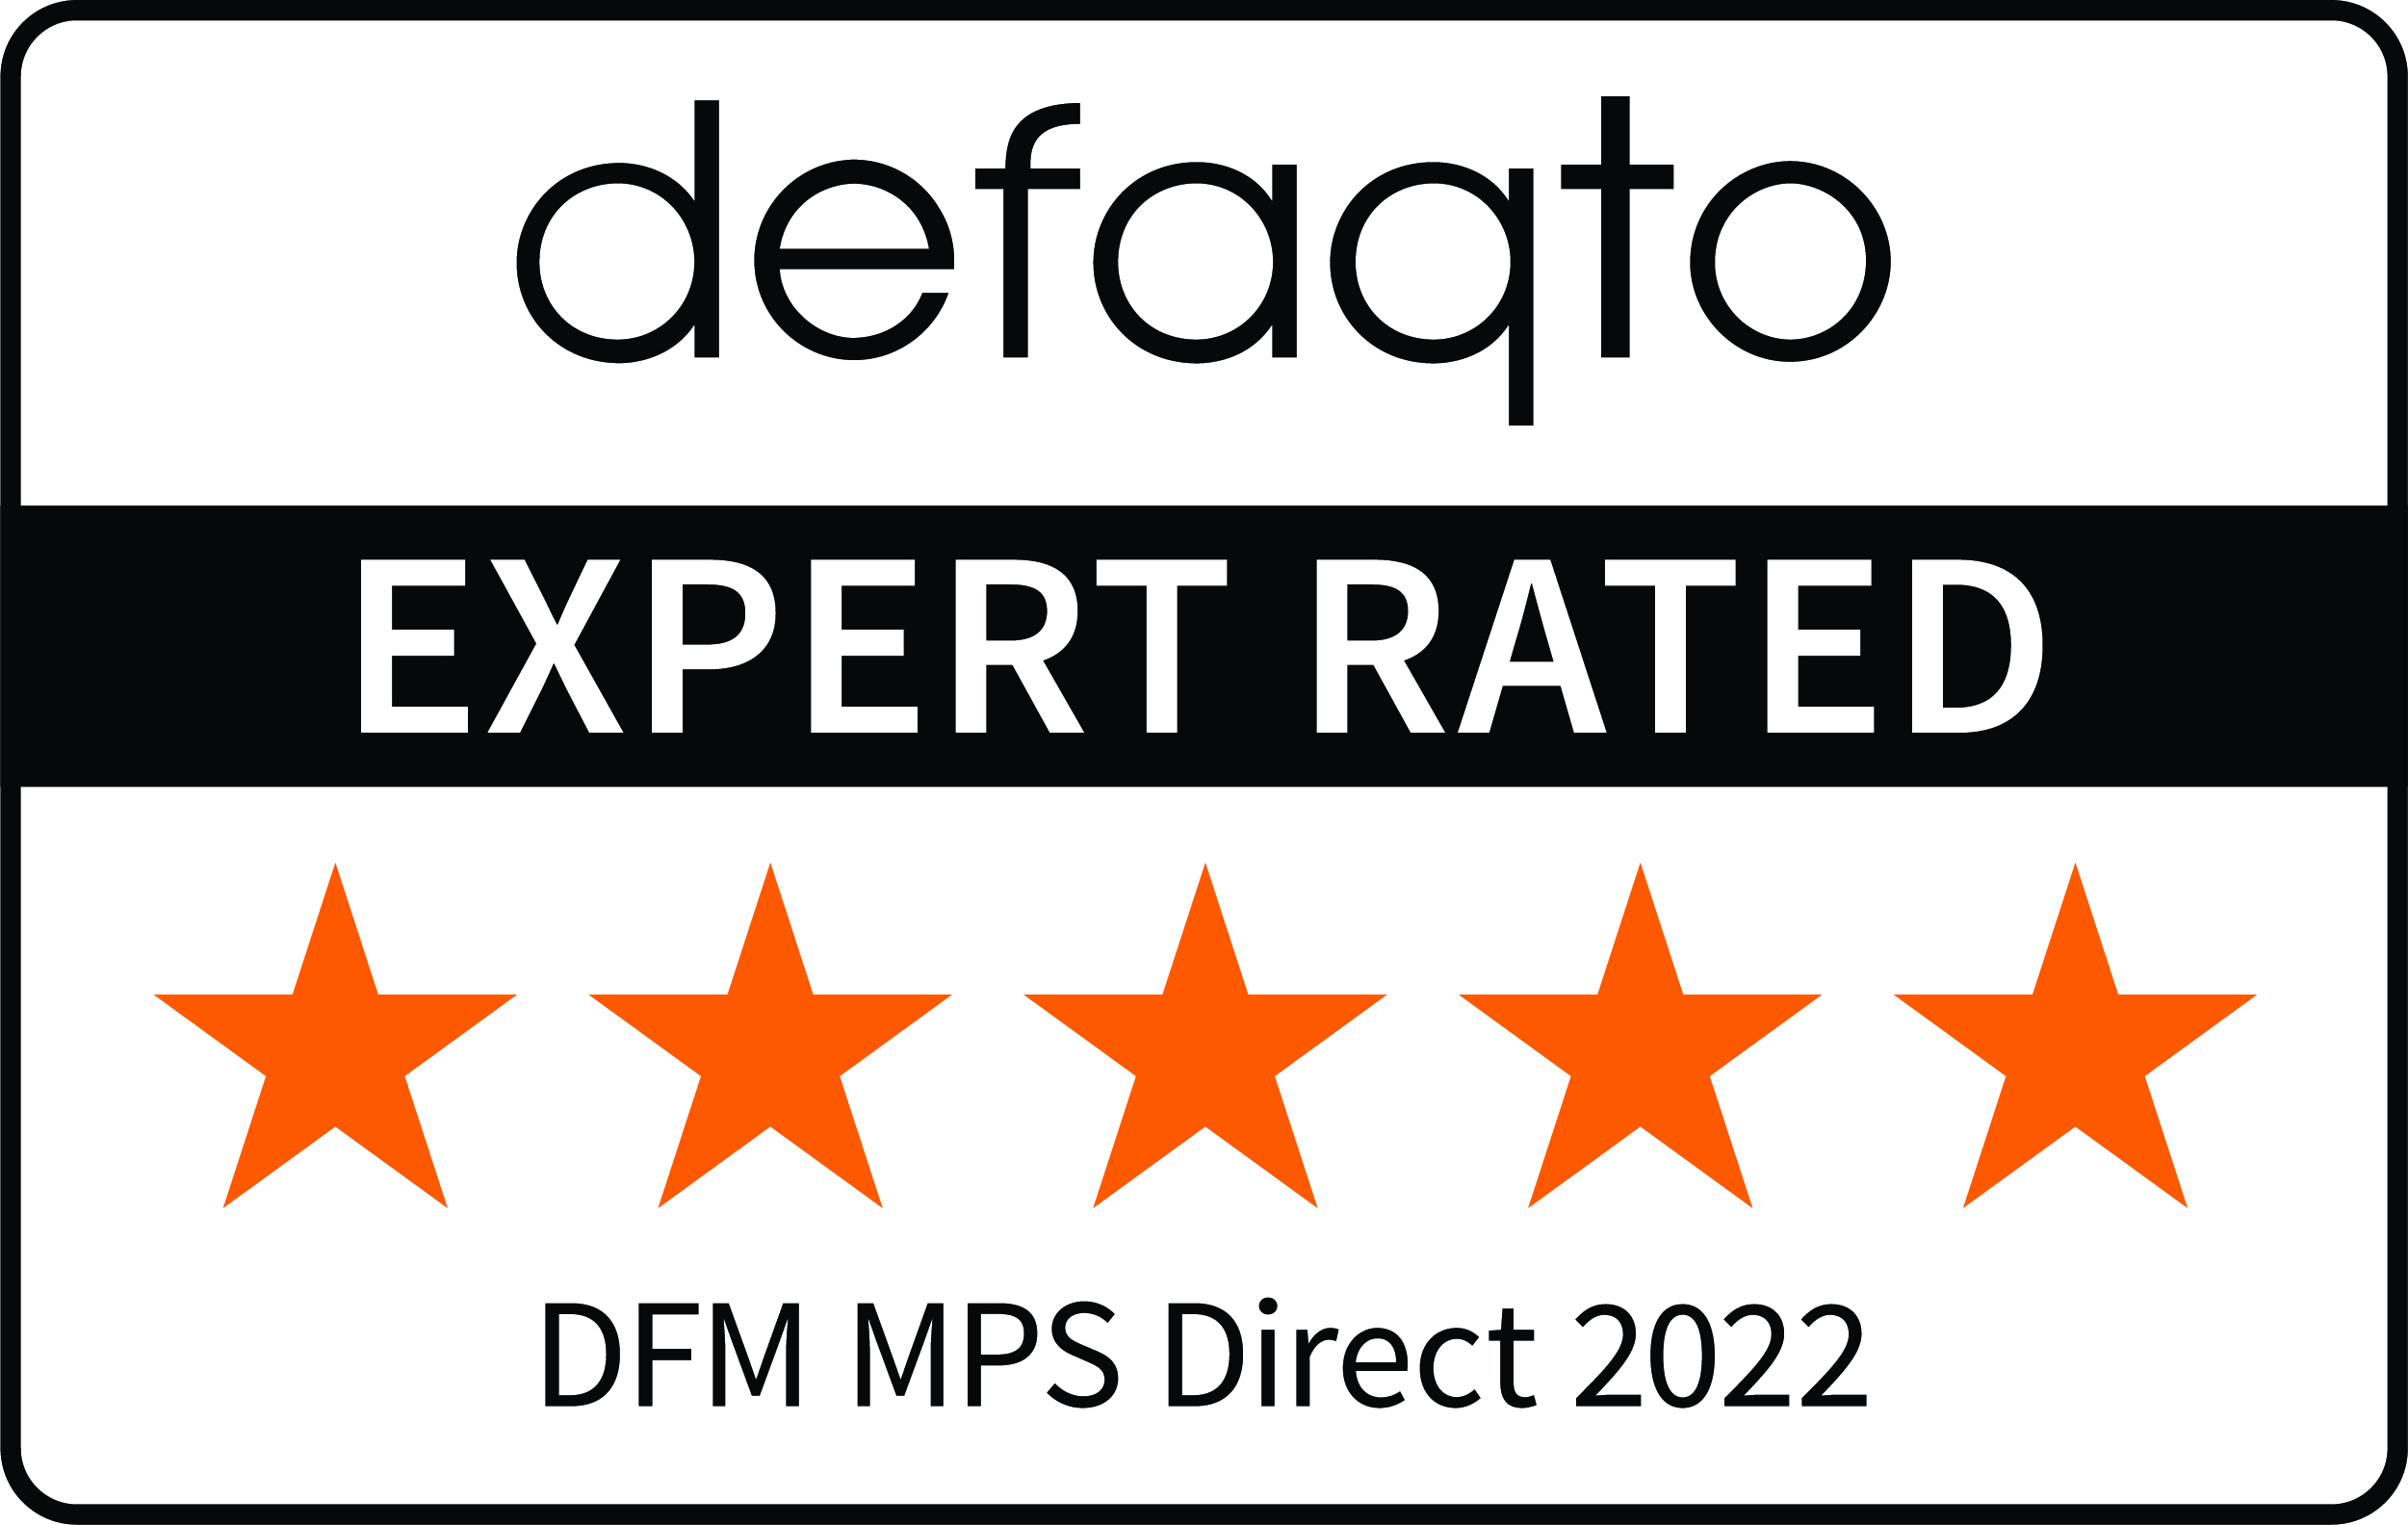 DFM-MPS-Direct-Rating-Category-and-Year-5-Colour-CMYK.jpg